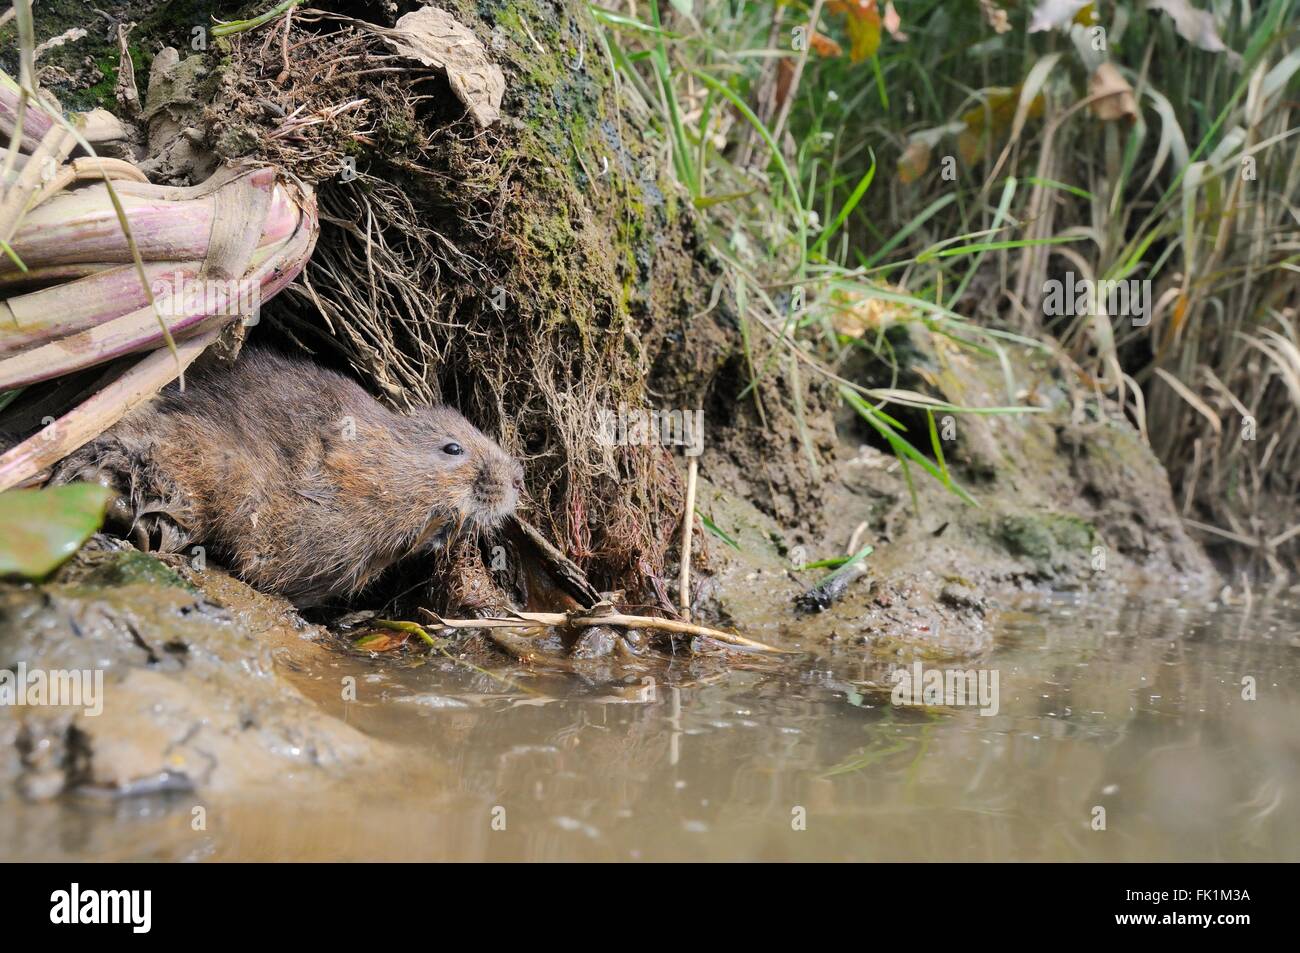 Water vole (Arvicola amphibius) emerging from its burrow in a river bank, Bude marshes, Cornwall, UK Stock Photo